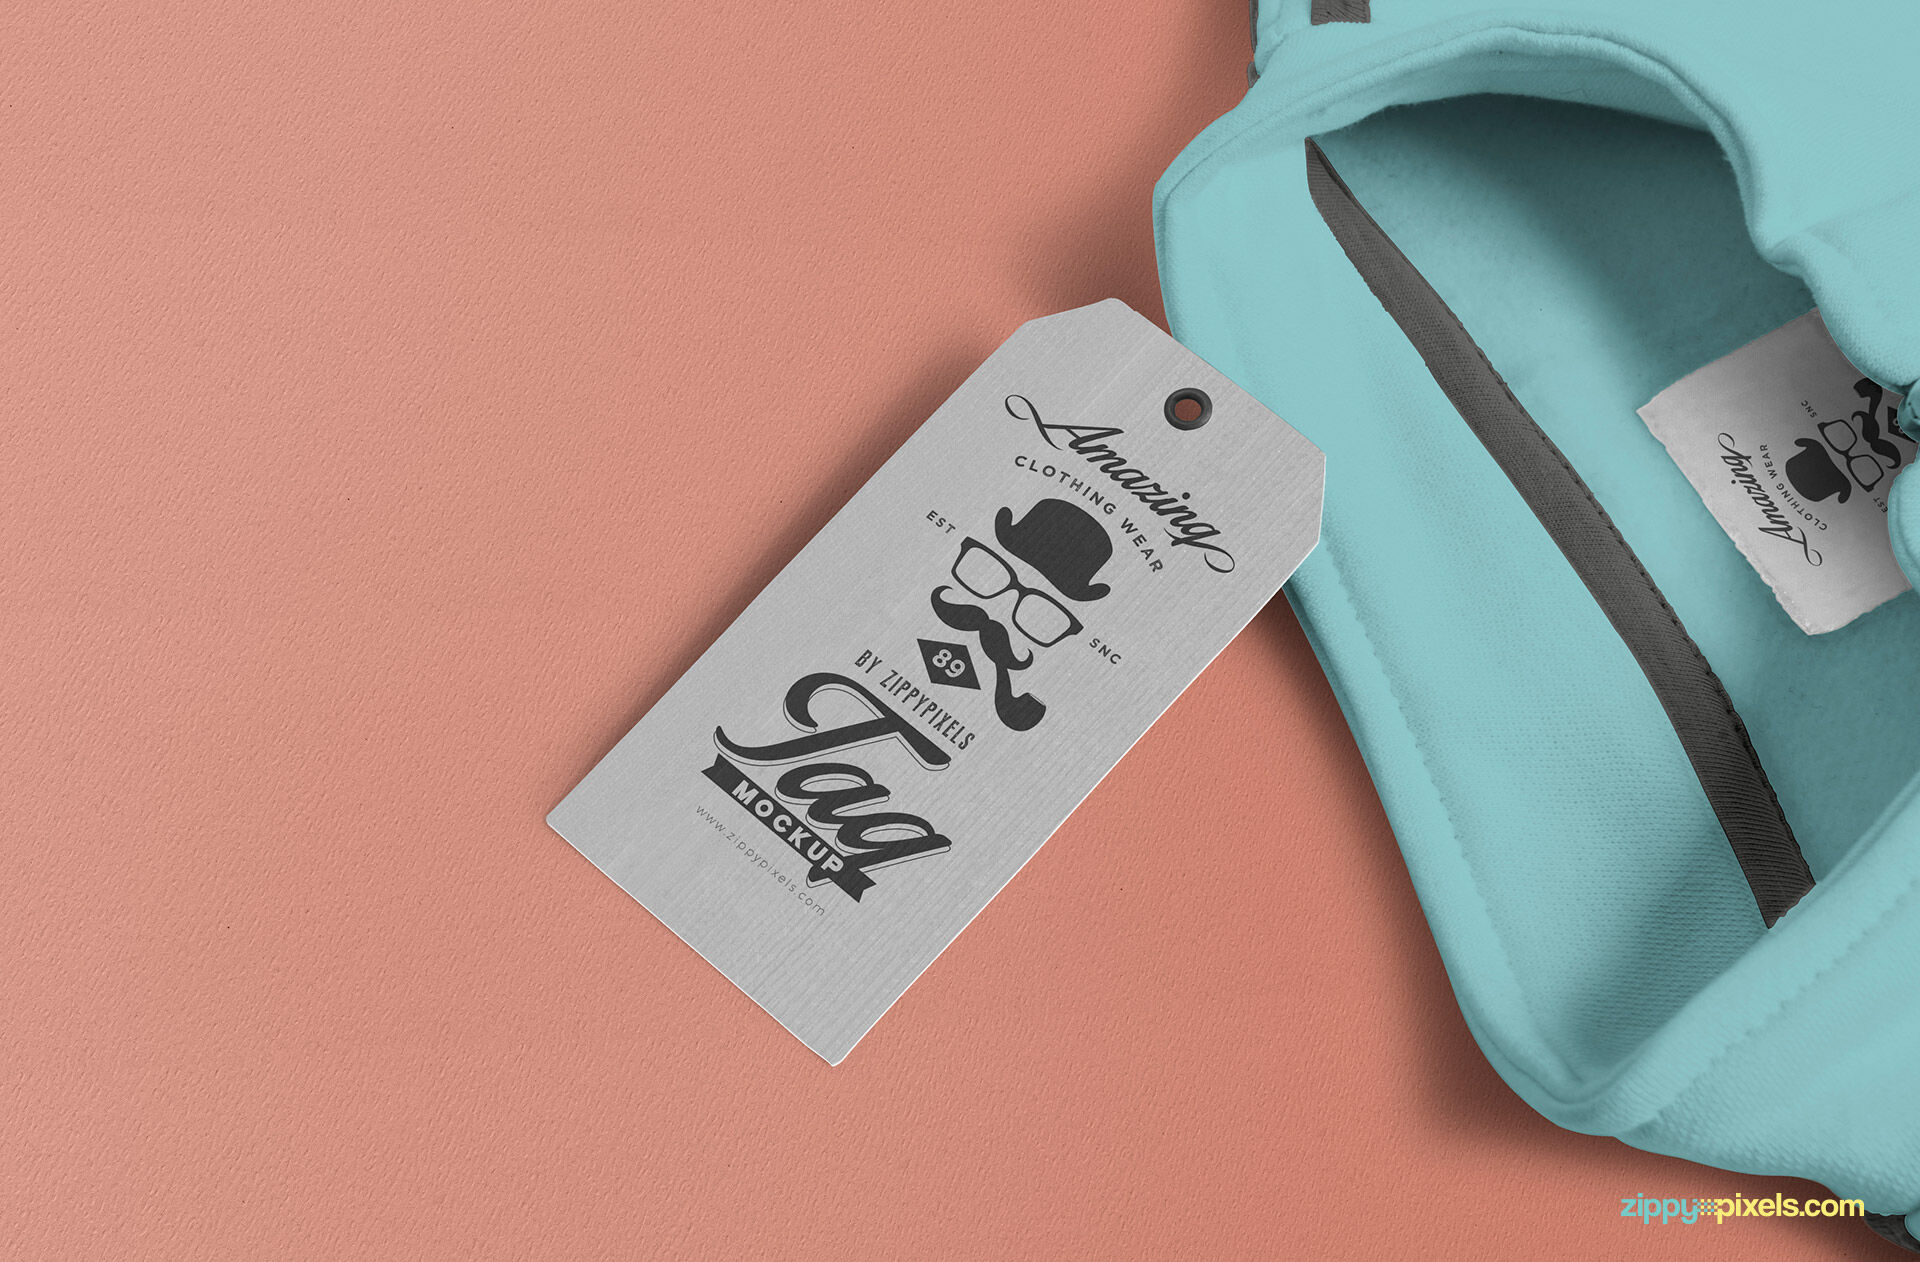 Price Tag and Inner Label of a Shirt PSD Mockup FREE PSD